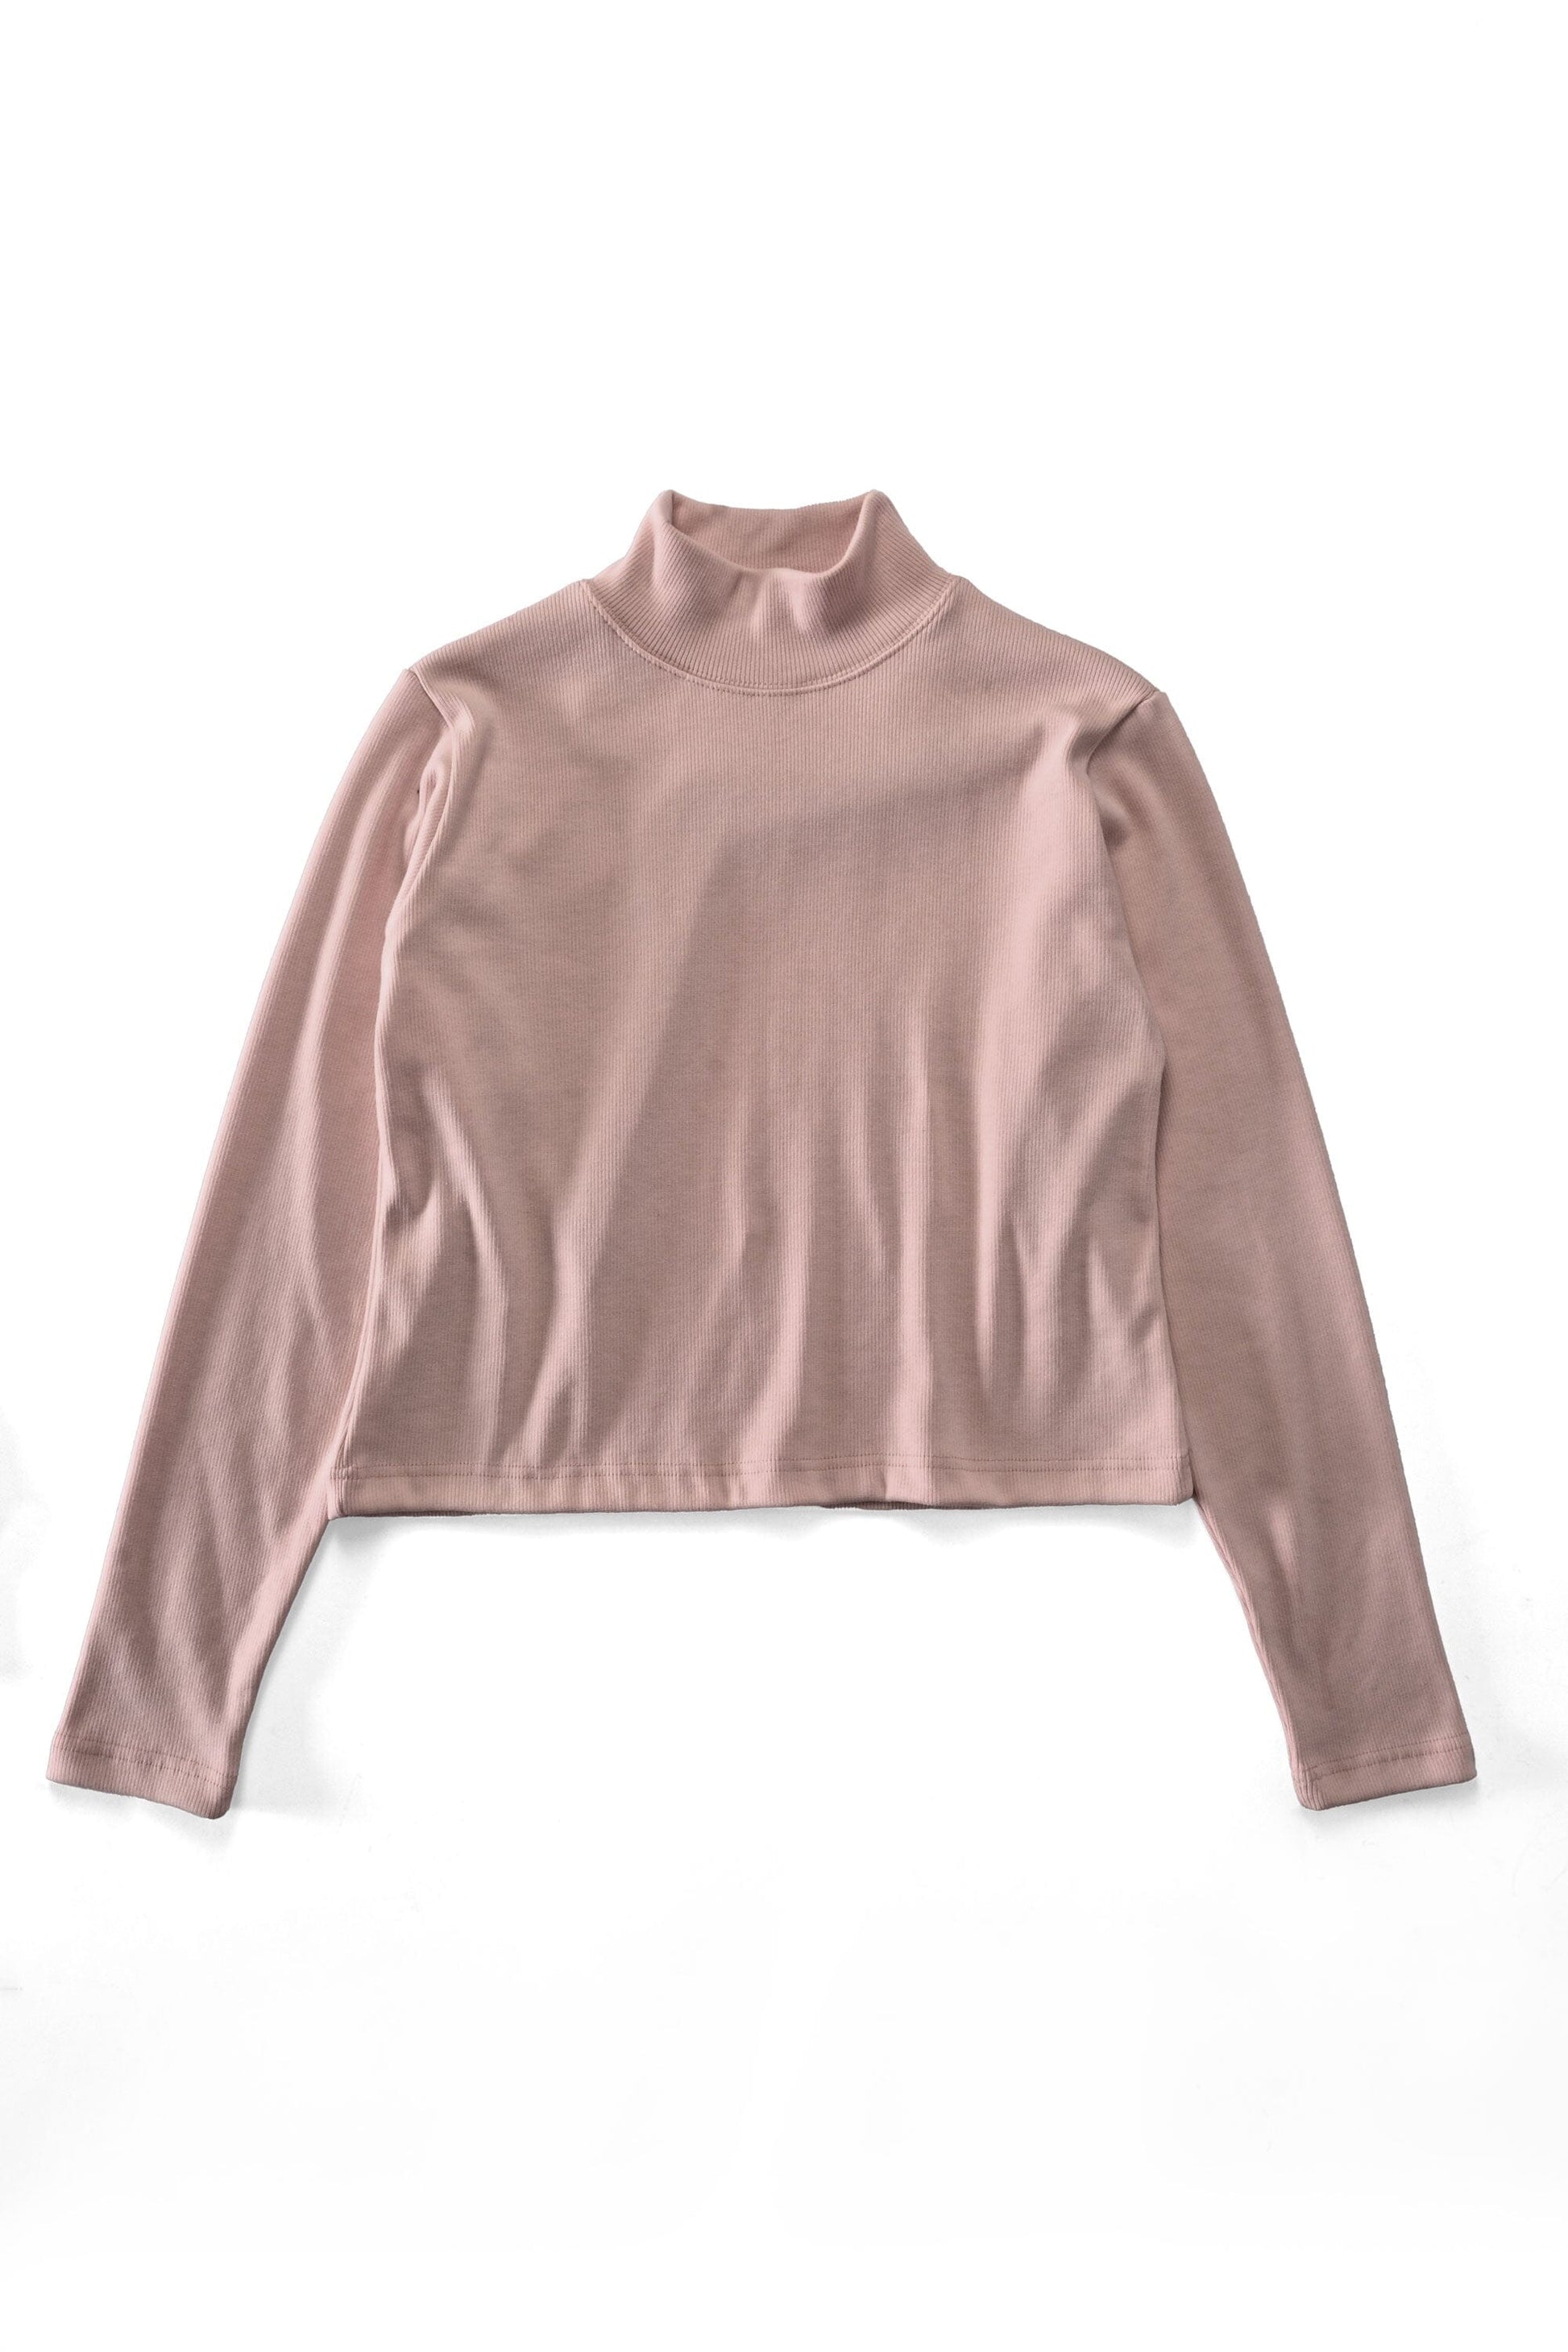 East West Women's Cropped Turtle Neck Sweatshirt Women's Sweat Shirt East West 